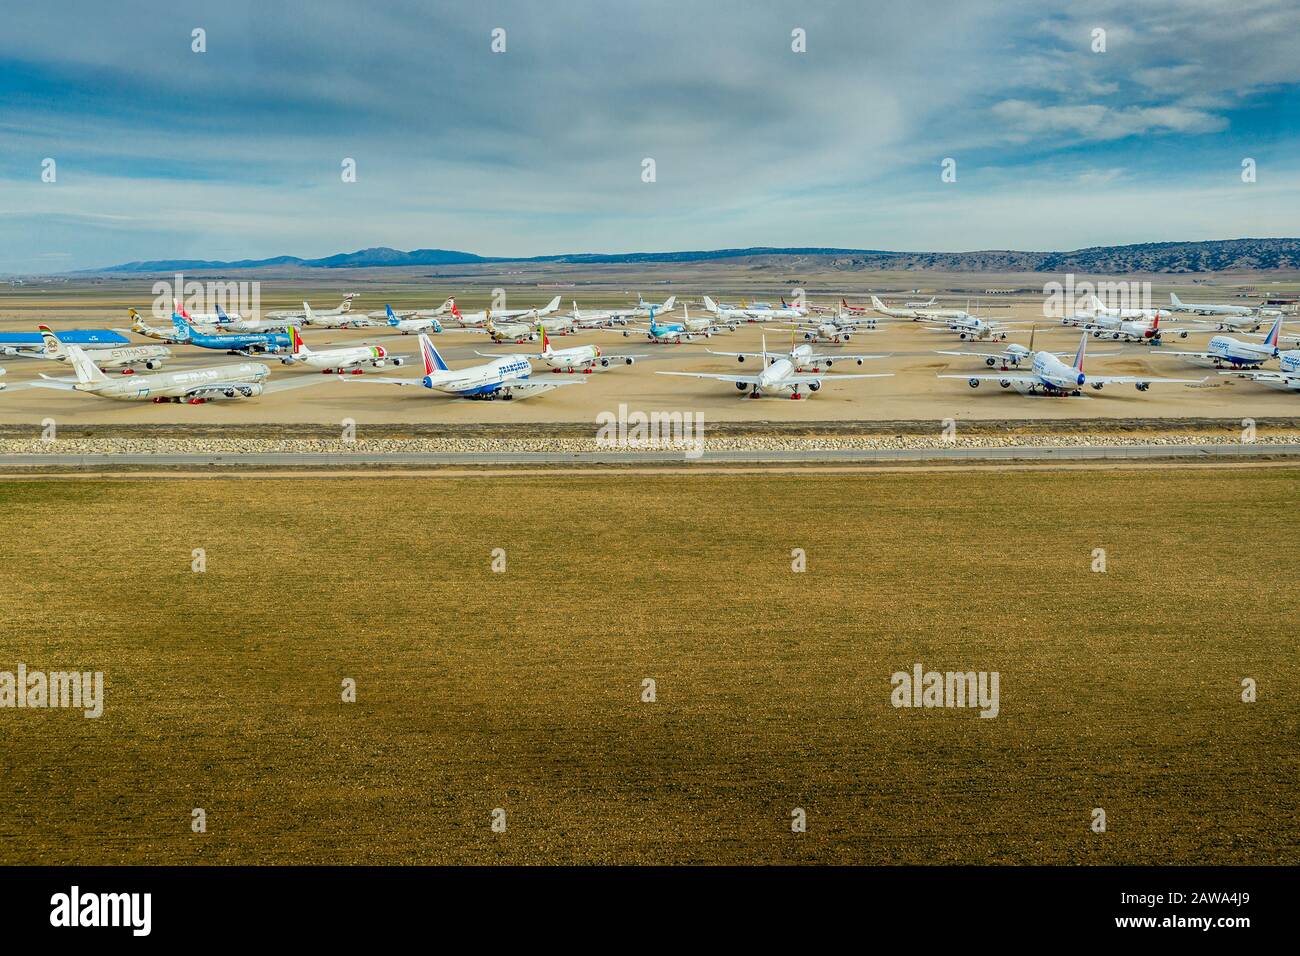 View of Teruel noncommercial airport where airplanes are stored and parked for refurbishment or maintenance in Spain Stock Photo